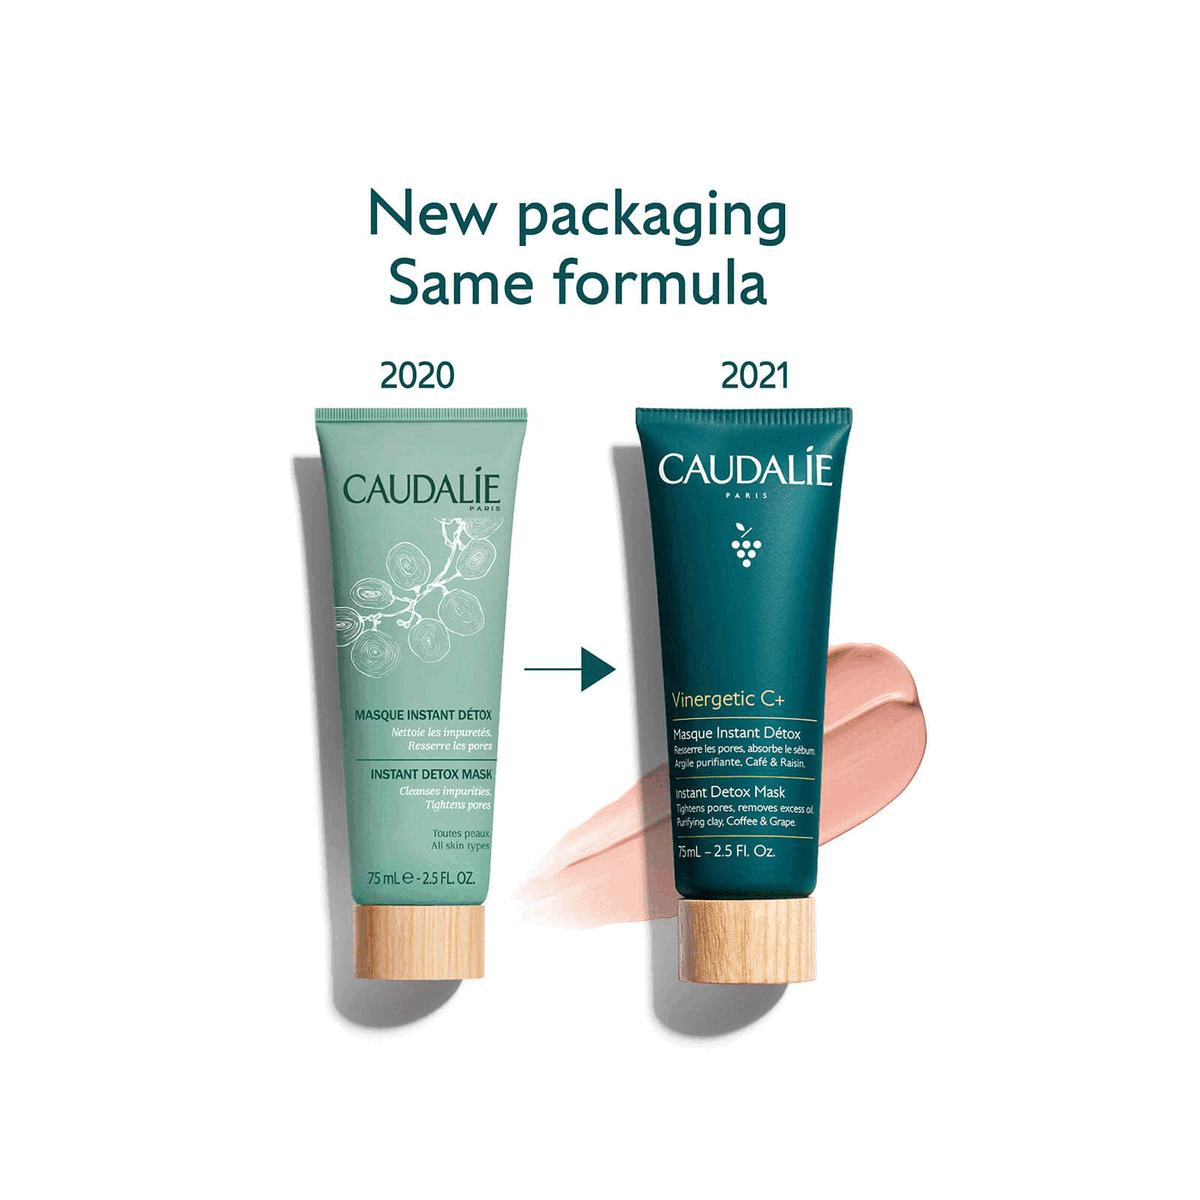 Image 1- New packaging Same formula 2020 2021 Image 2- ROSE CLAY purifying PAPAYA ENZYME brightening, pore minimising TANNINS Immediate astringent effect, tighten pores GRAPE MARC draining